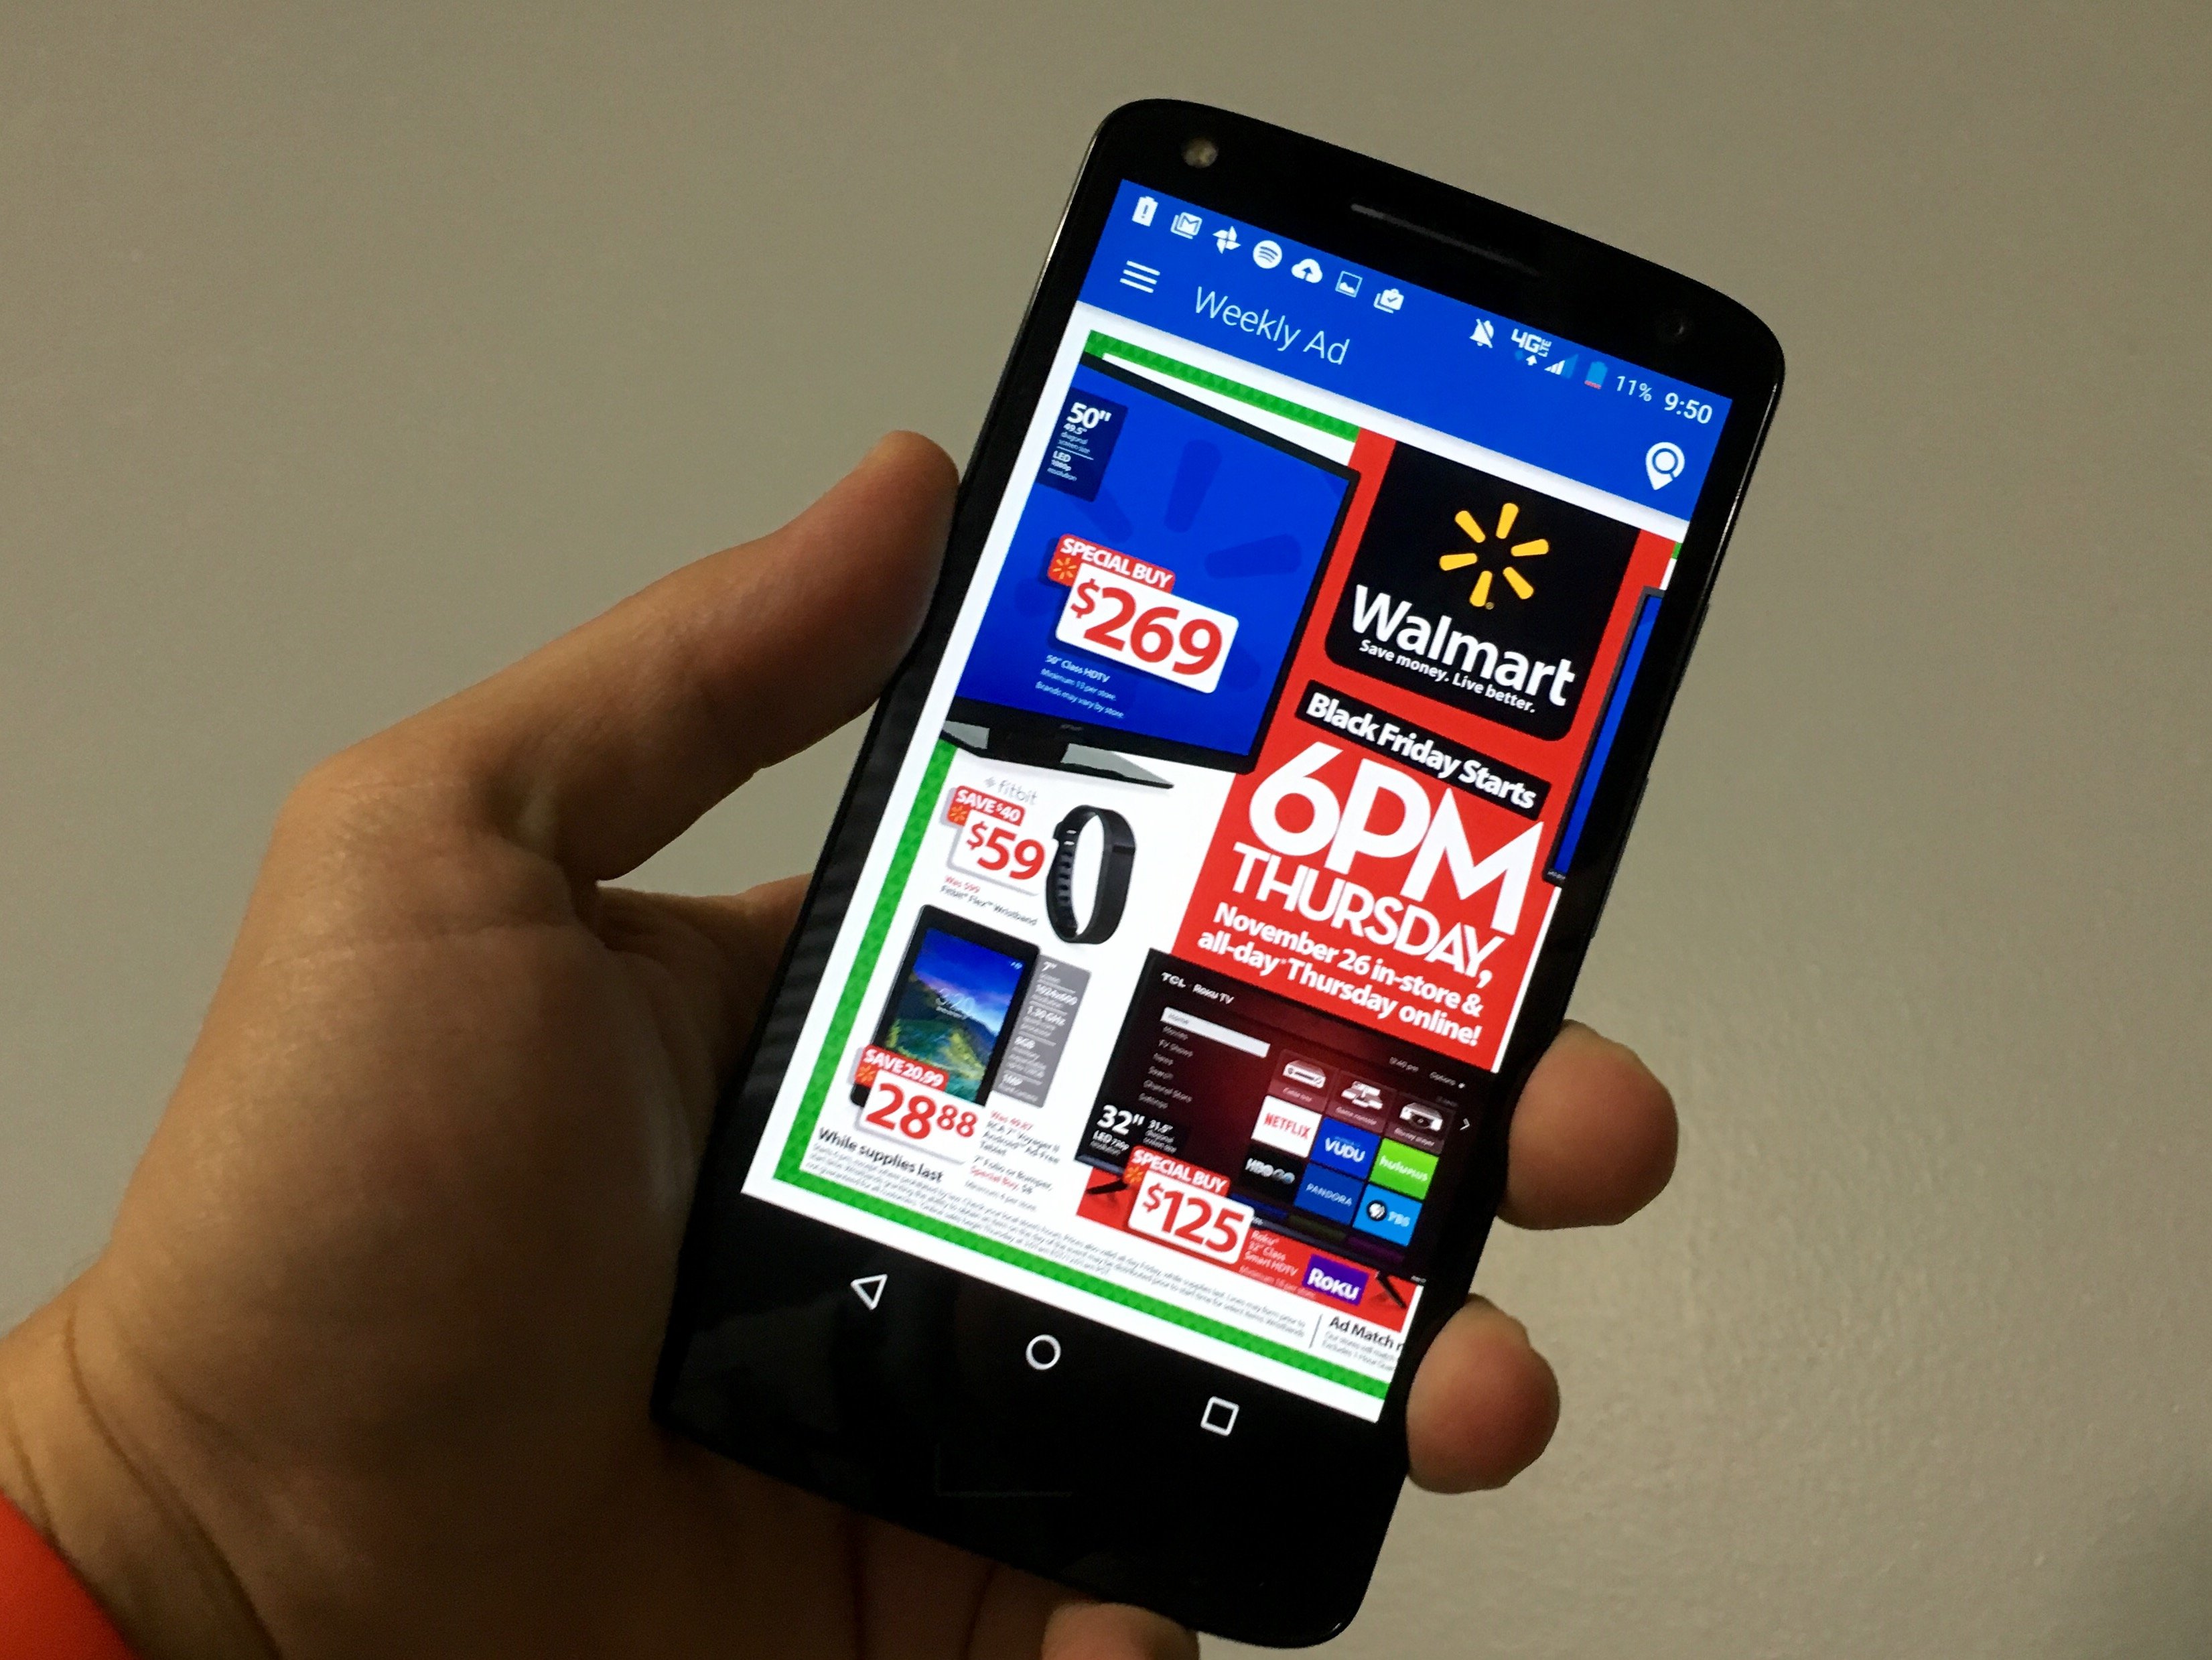 See the Walmart Black Friday 2015 ad first on your phone.